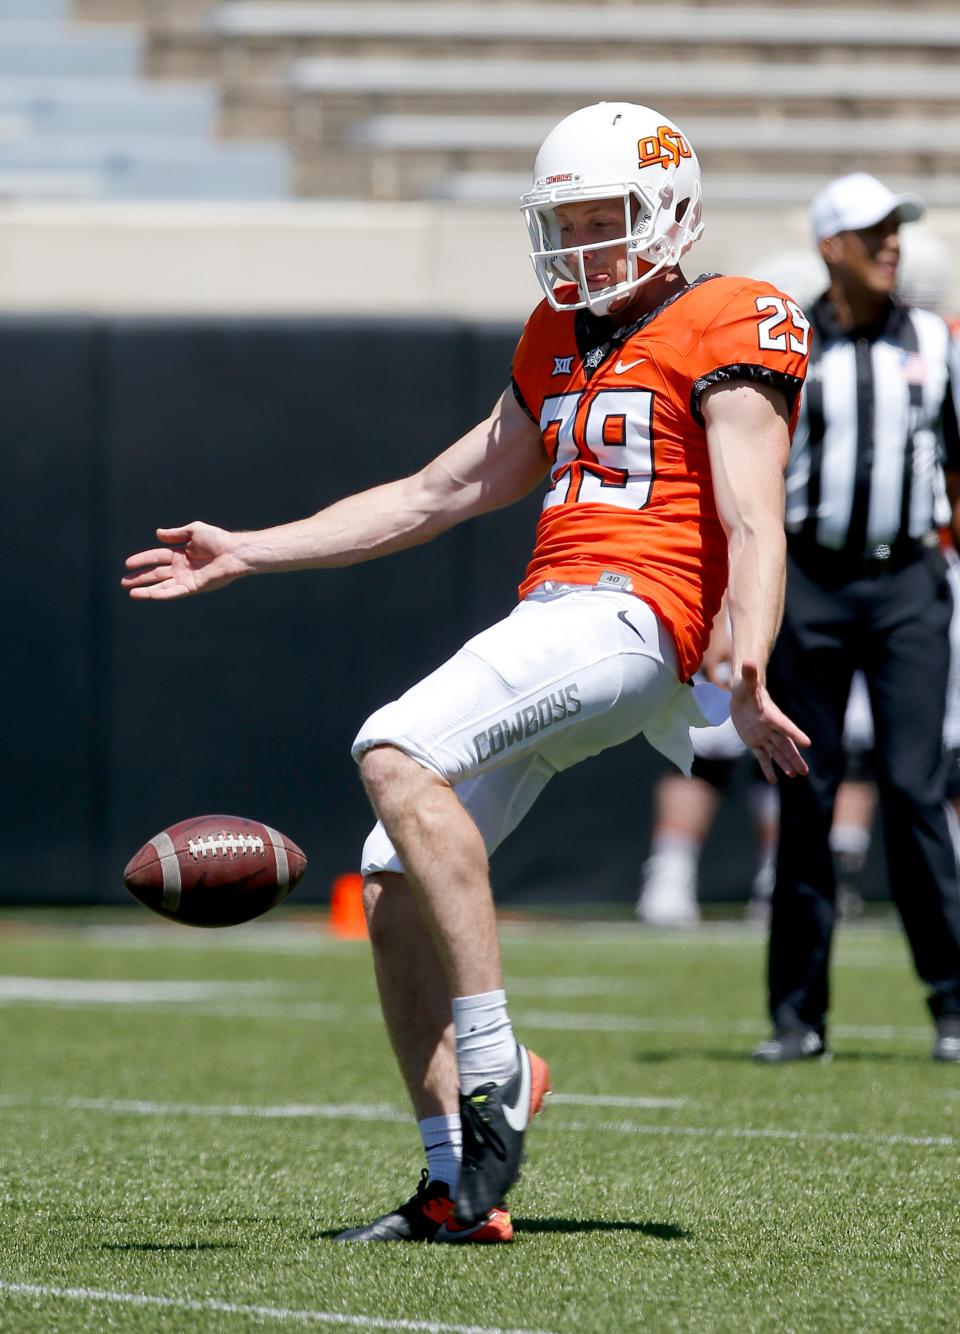 Oklahoma State punter Tom Hutton (29) doesn't have the most gaudy average, but he easily led the Big 12 last season in punts fair caught and punts inside the opponents' 20-yard line. That helped the Cowboys rank second in the FBS in fewest punt-return yards allowed.